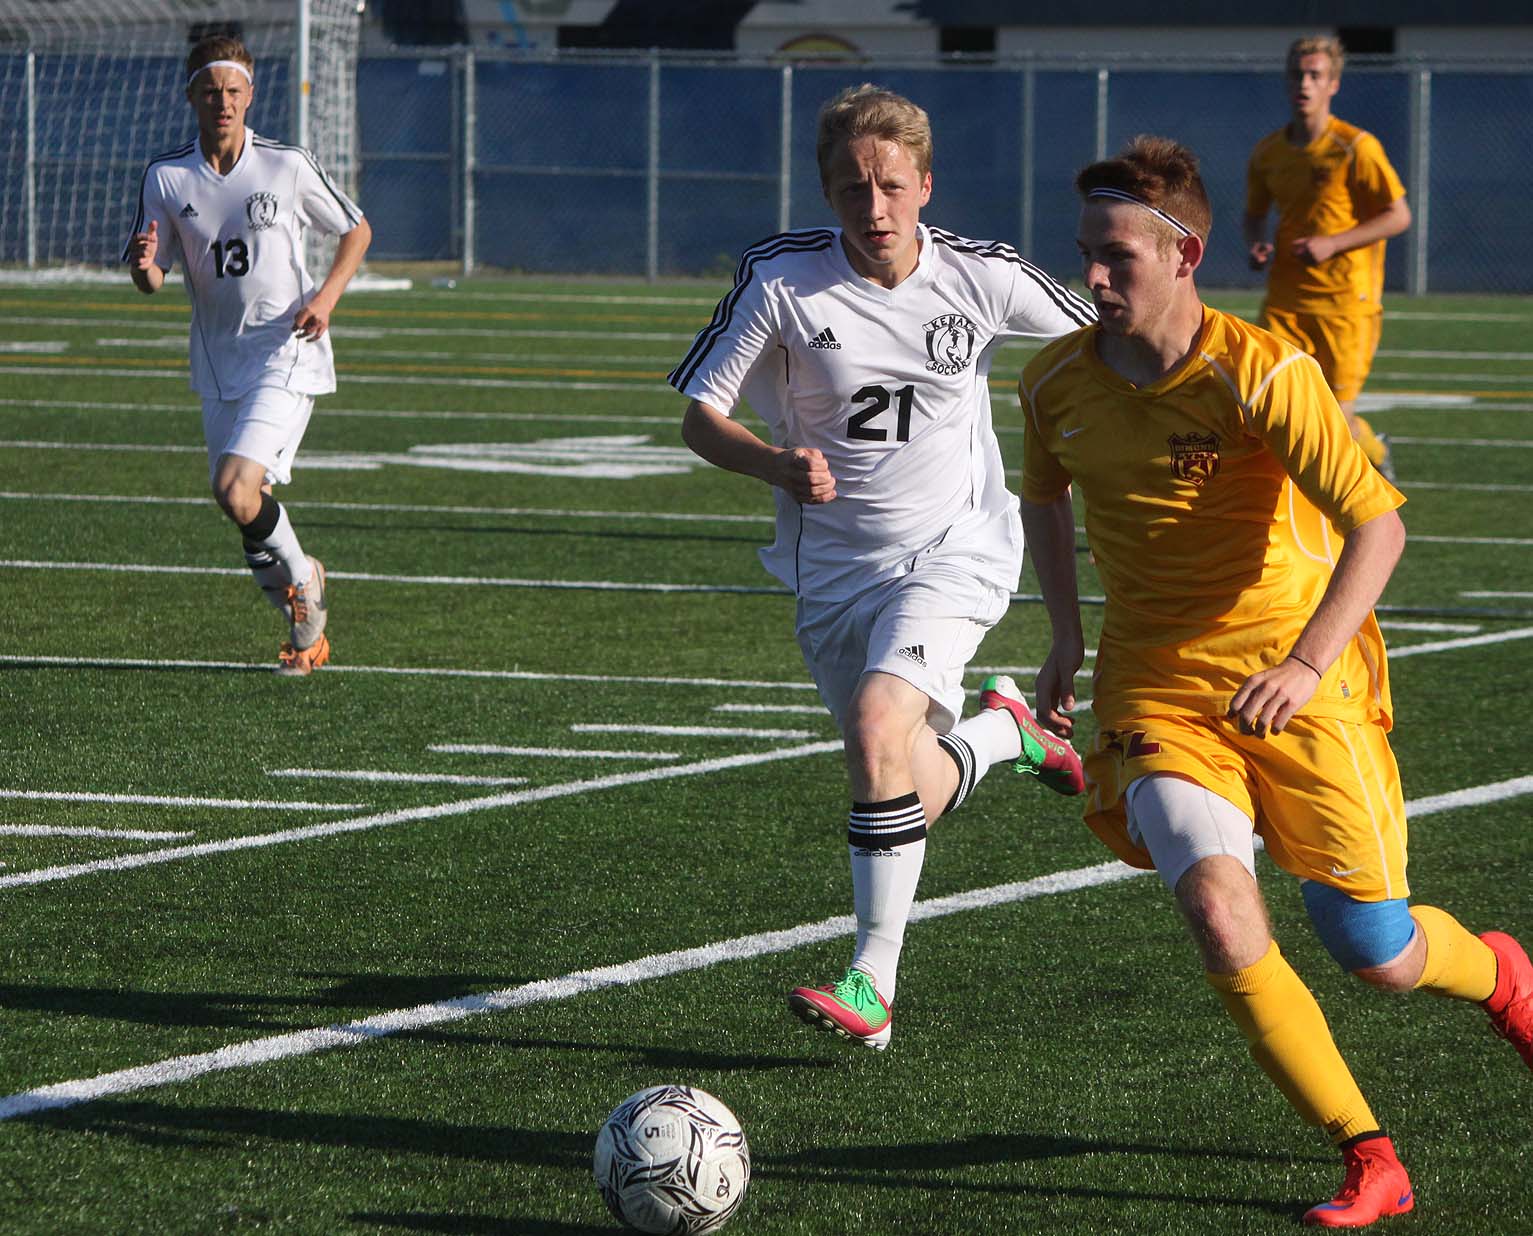 Kenai freshman Riley McKee hounds Dimond defender Kyle Stone during Friday's state soccer semifinal at Bartlett High in Anchorage. Dimond won 3-0.